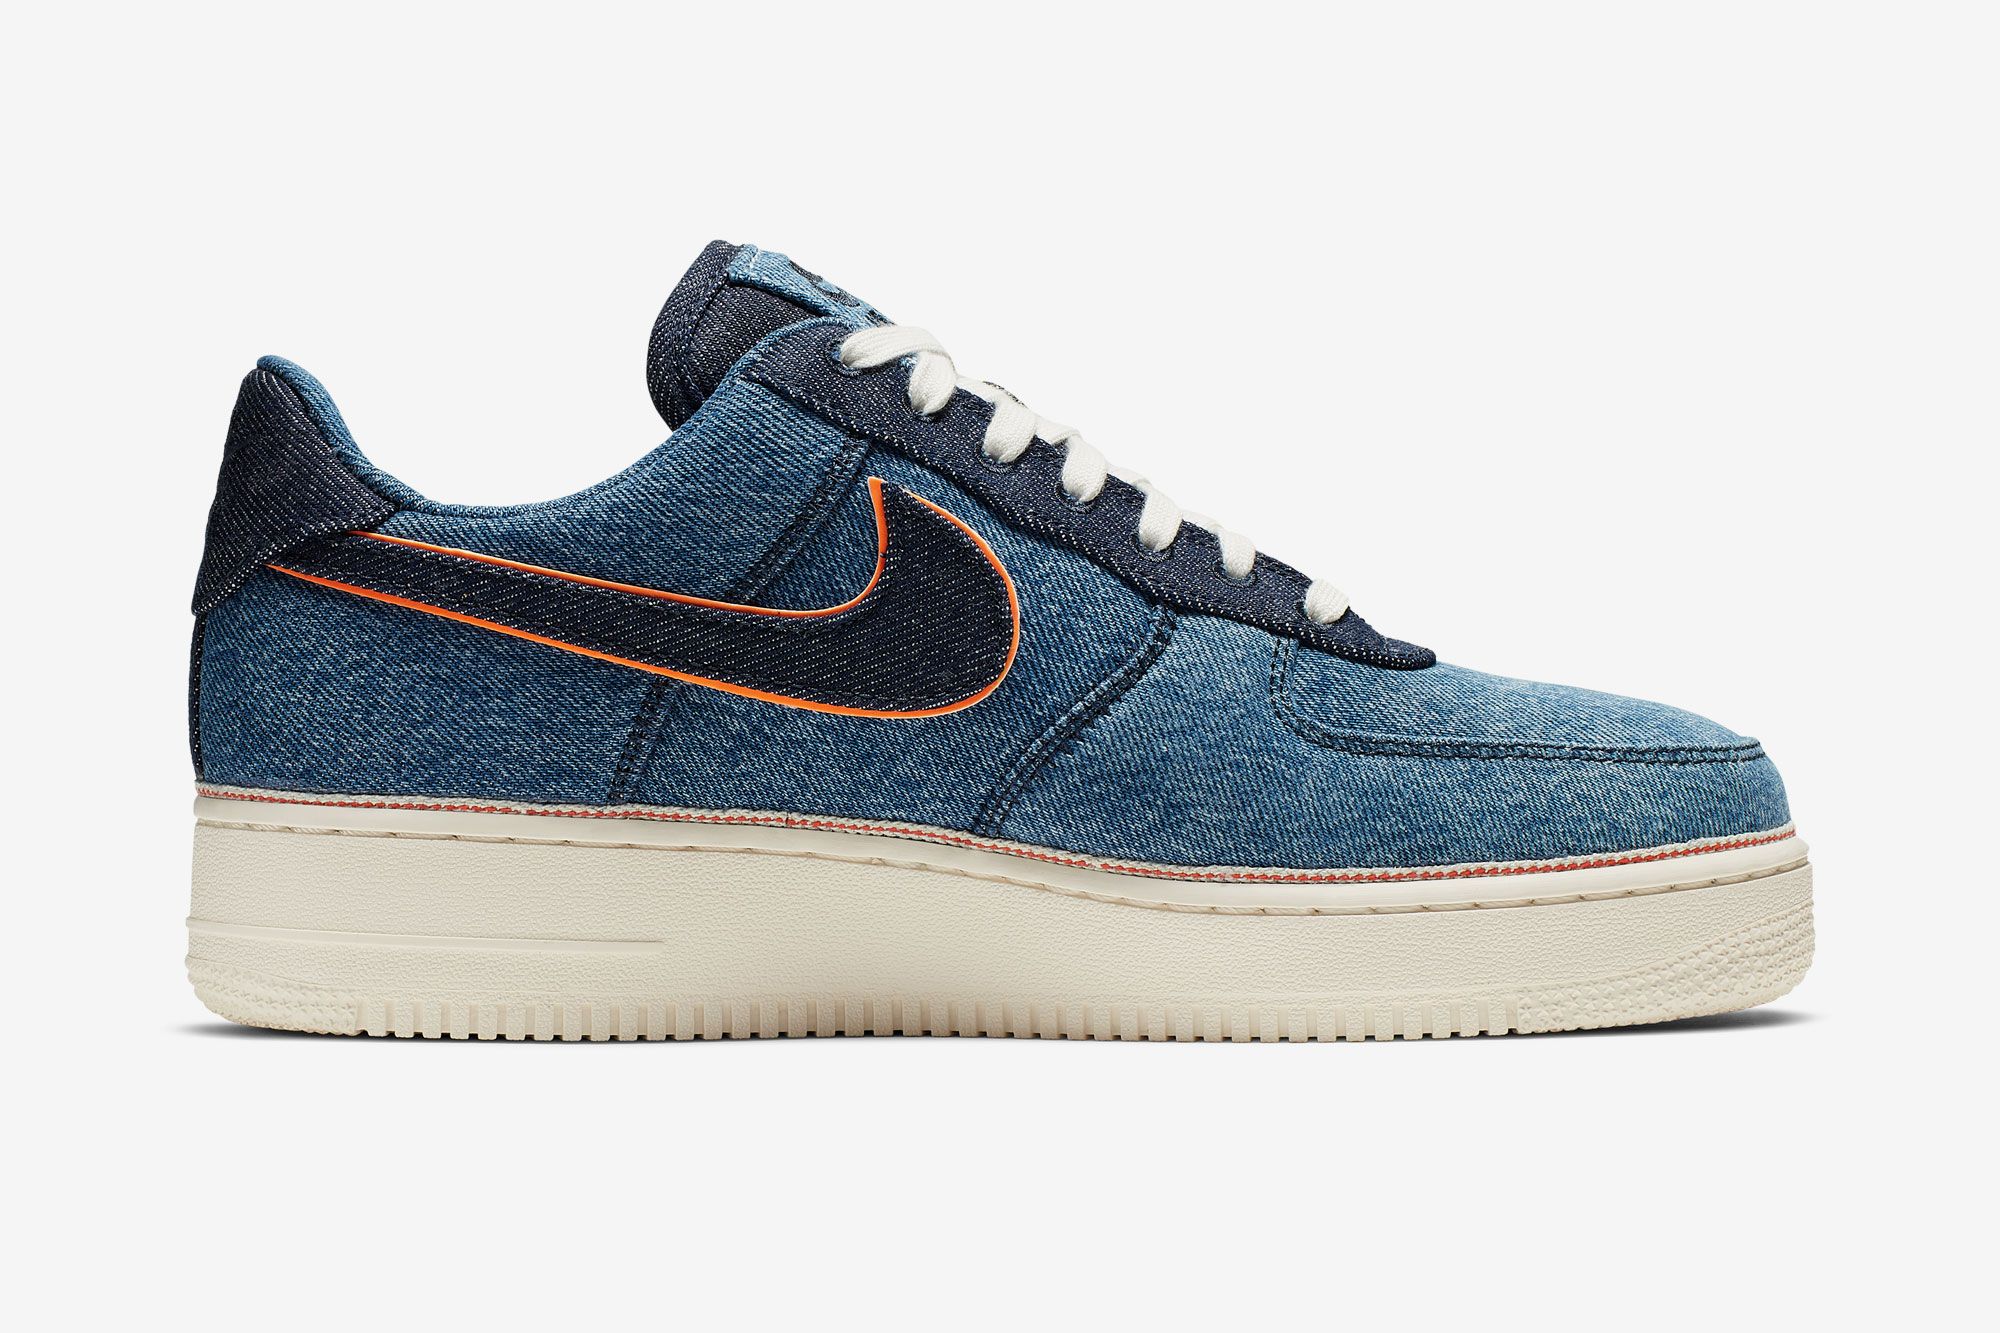 Lidiar con Post impresionismo Prima Nike and 3x1 Are Releasing a Denim Air Force 1.